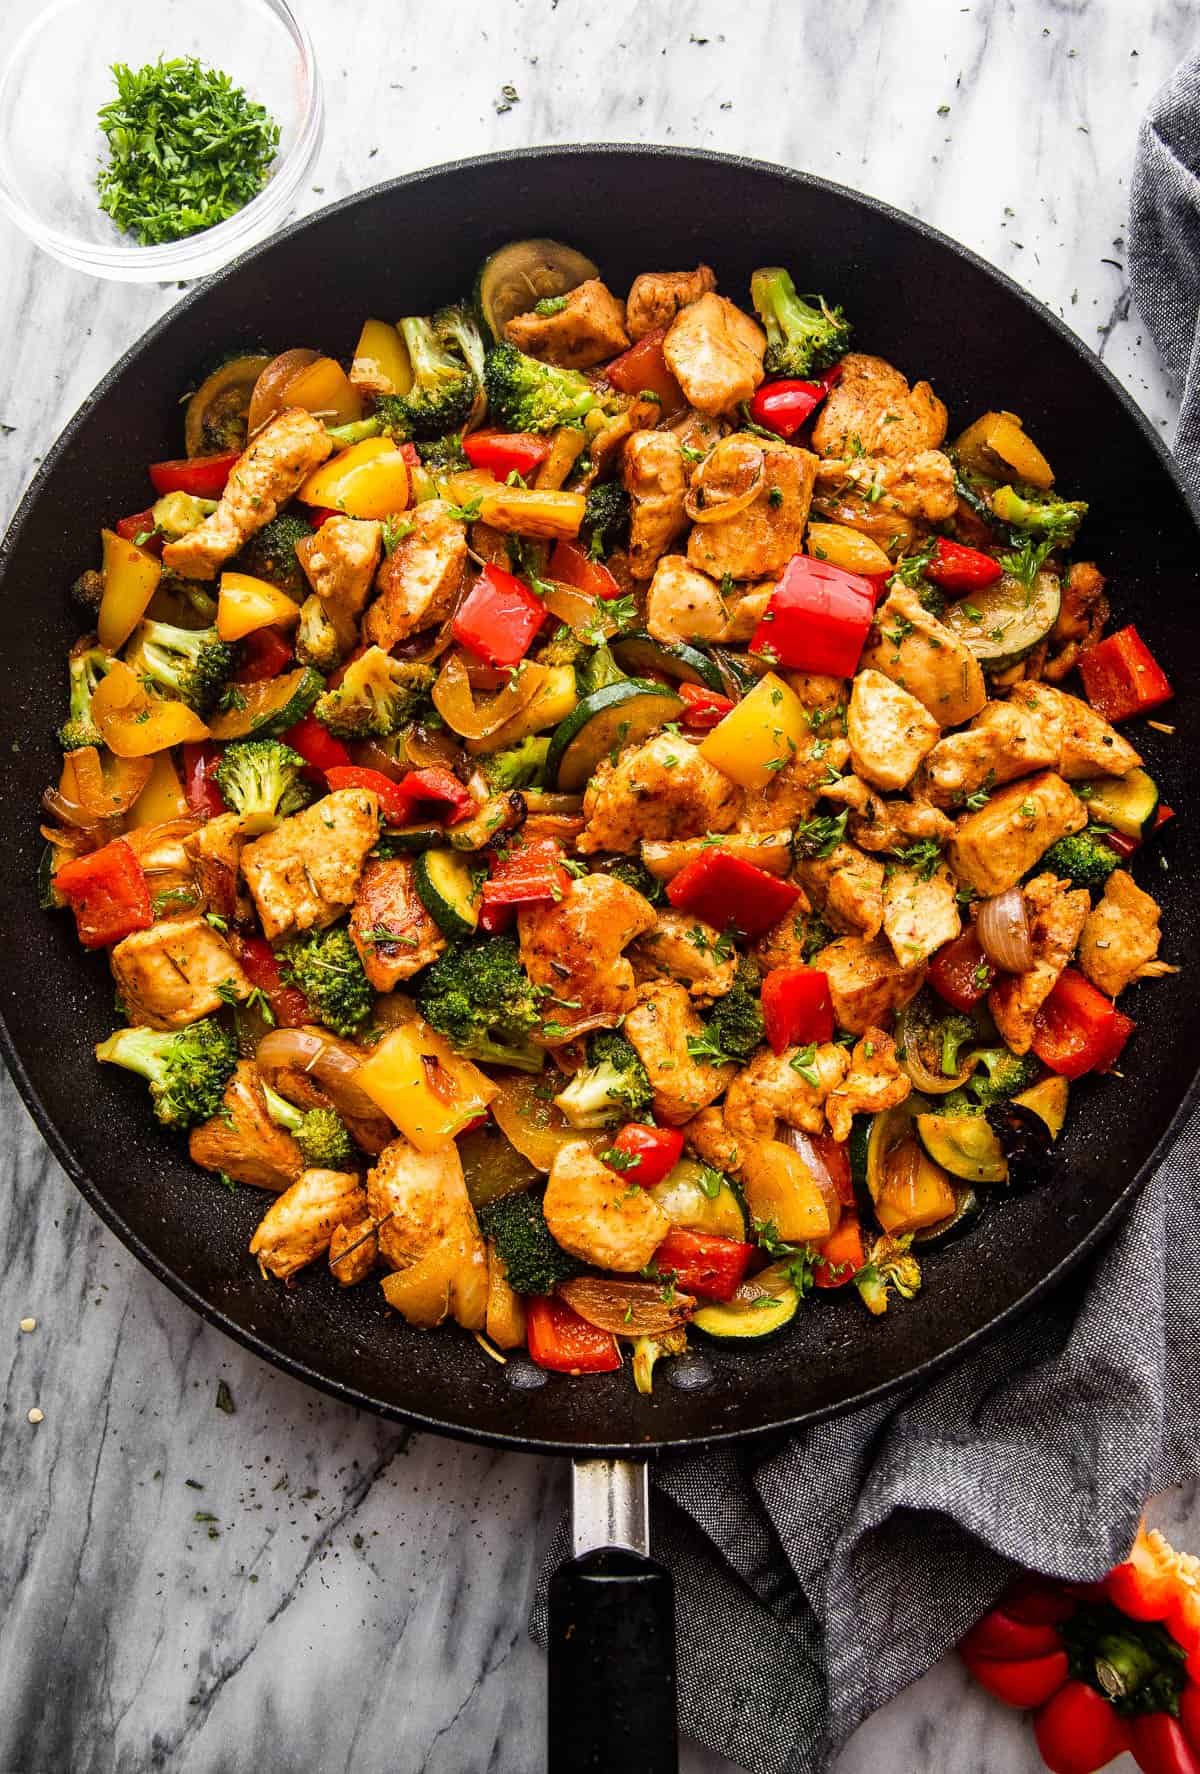 Chicken And Vegetable Skillet - Meals Under 500 Calories